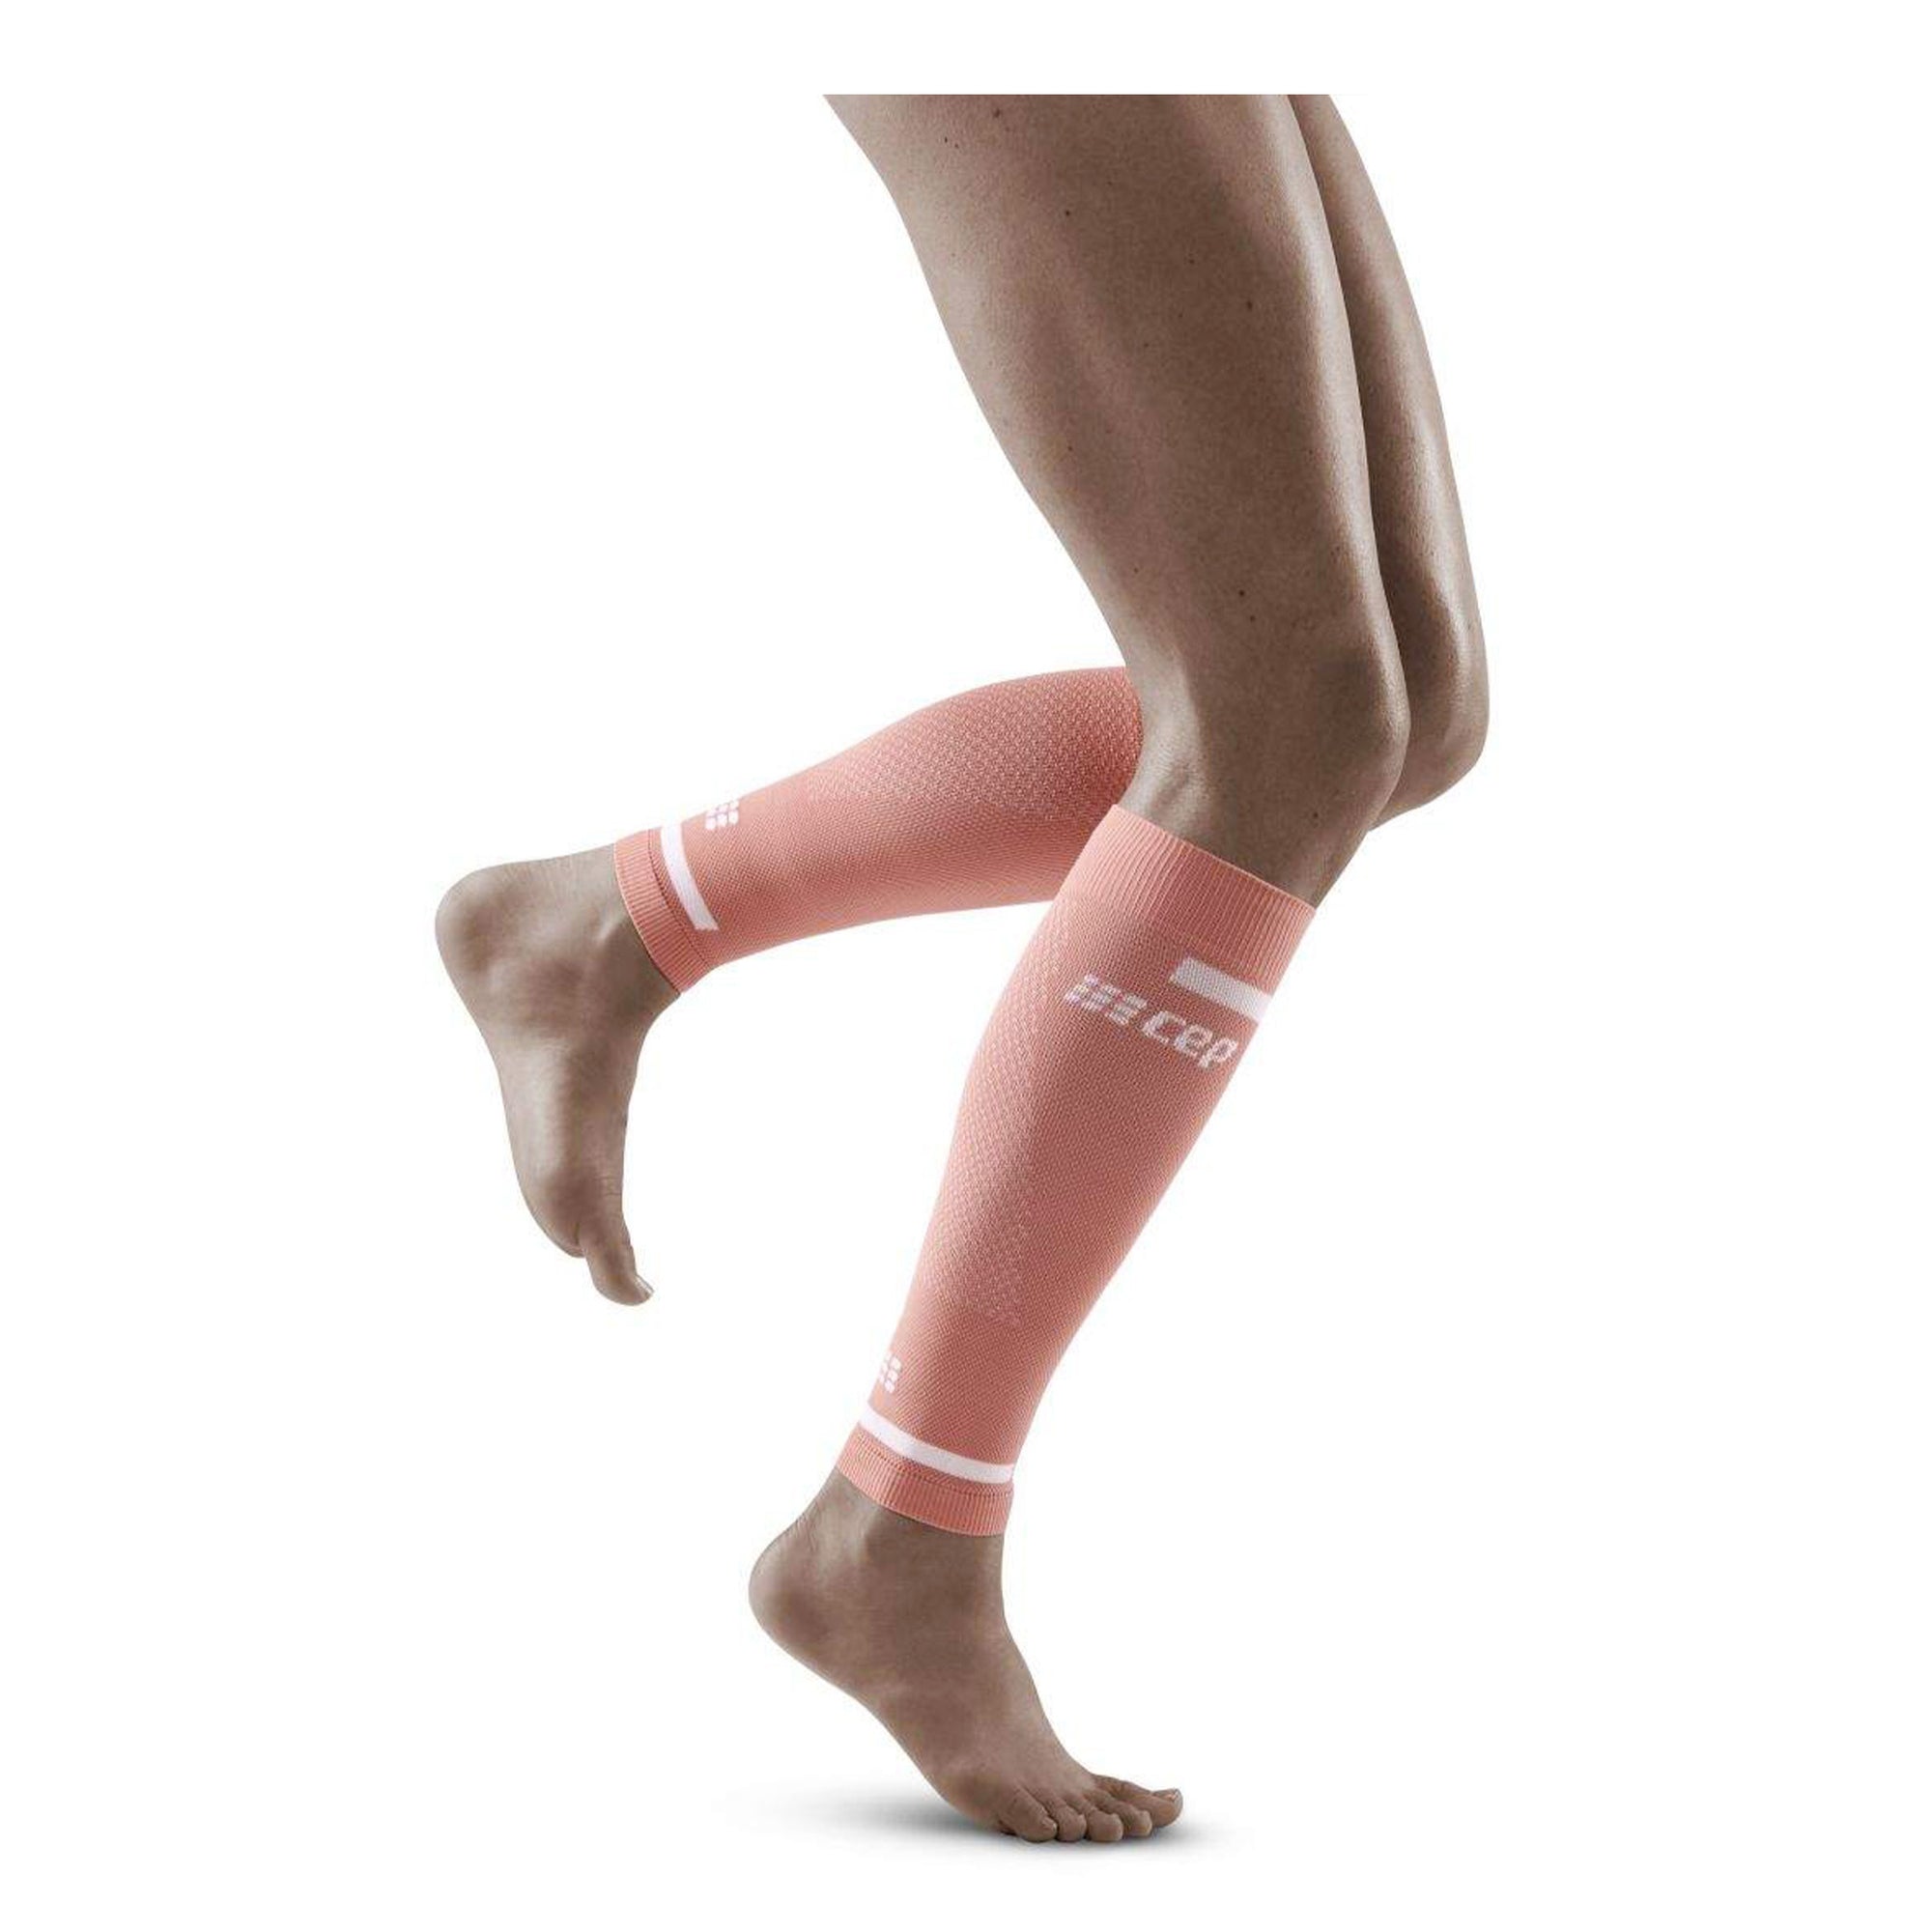 CEP THE RUN 4.0 COMPRESSION CALF SLEEVES - FEMME